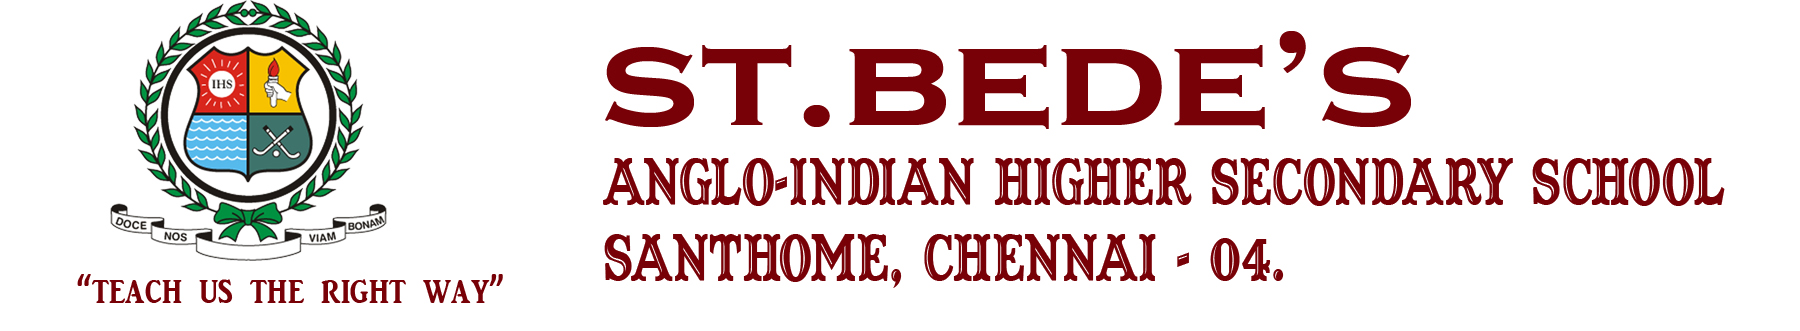 ST. BEDE S ANGLO INDIAN HIGHER SECONDARY SCHOOL